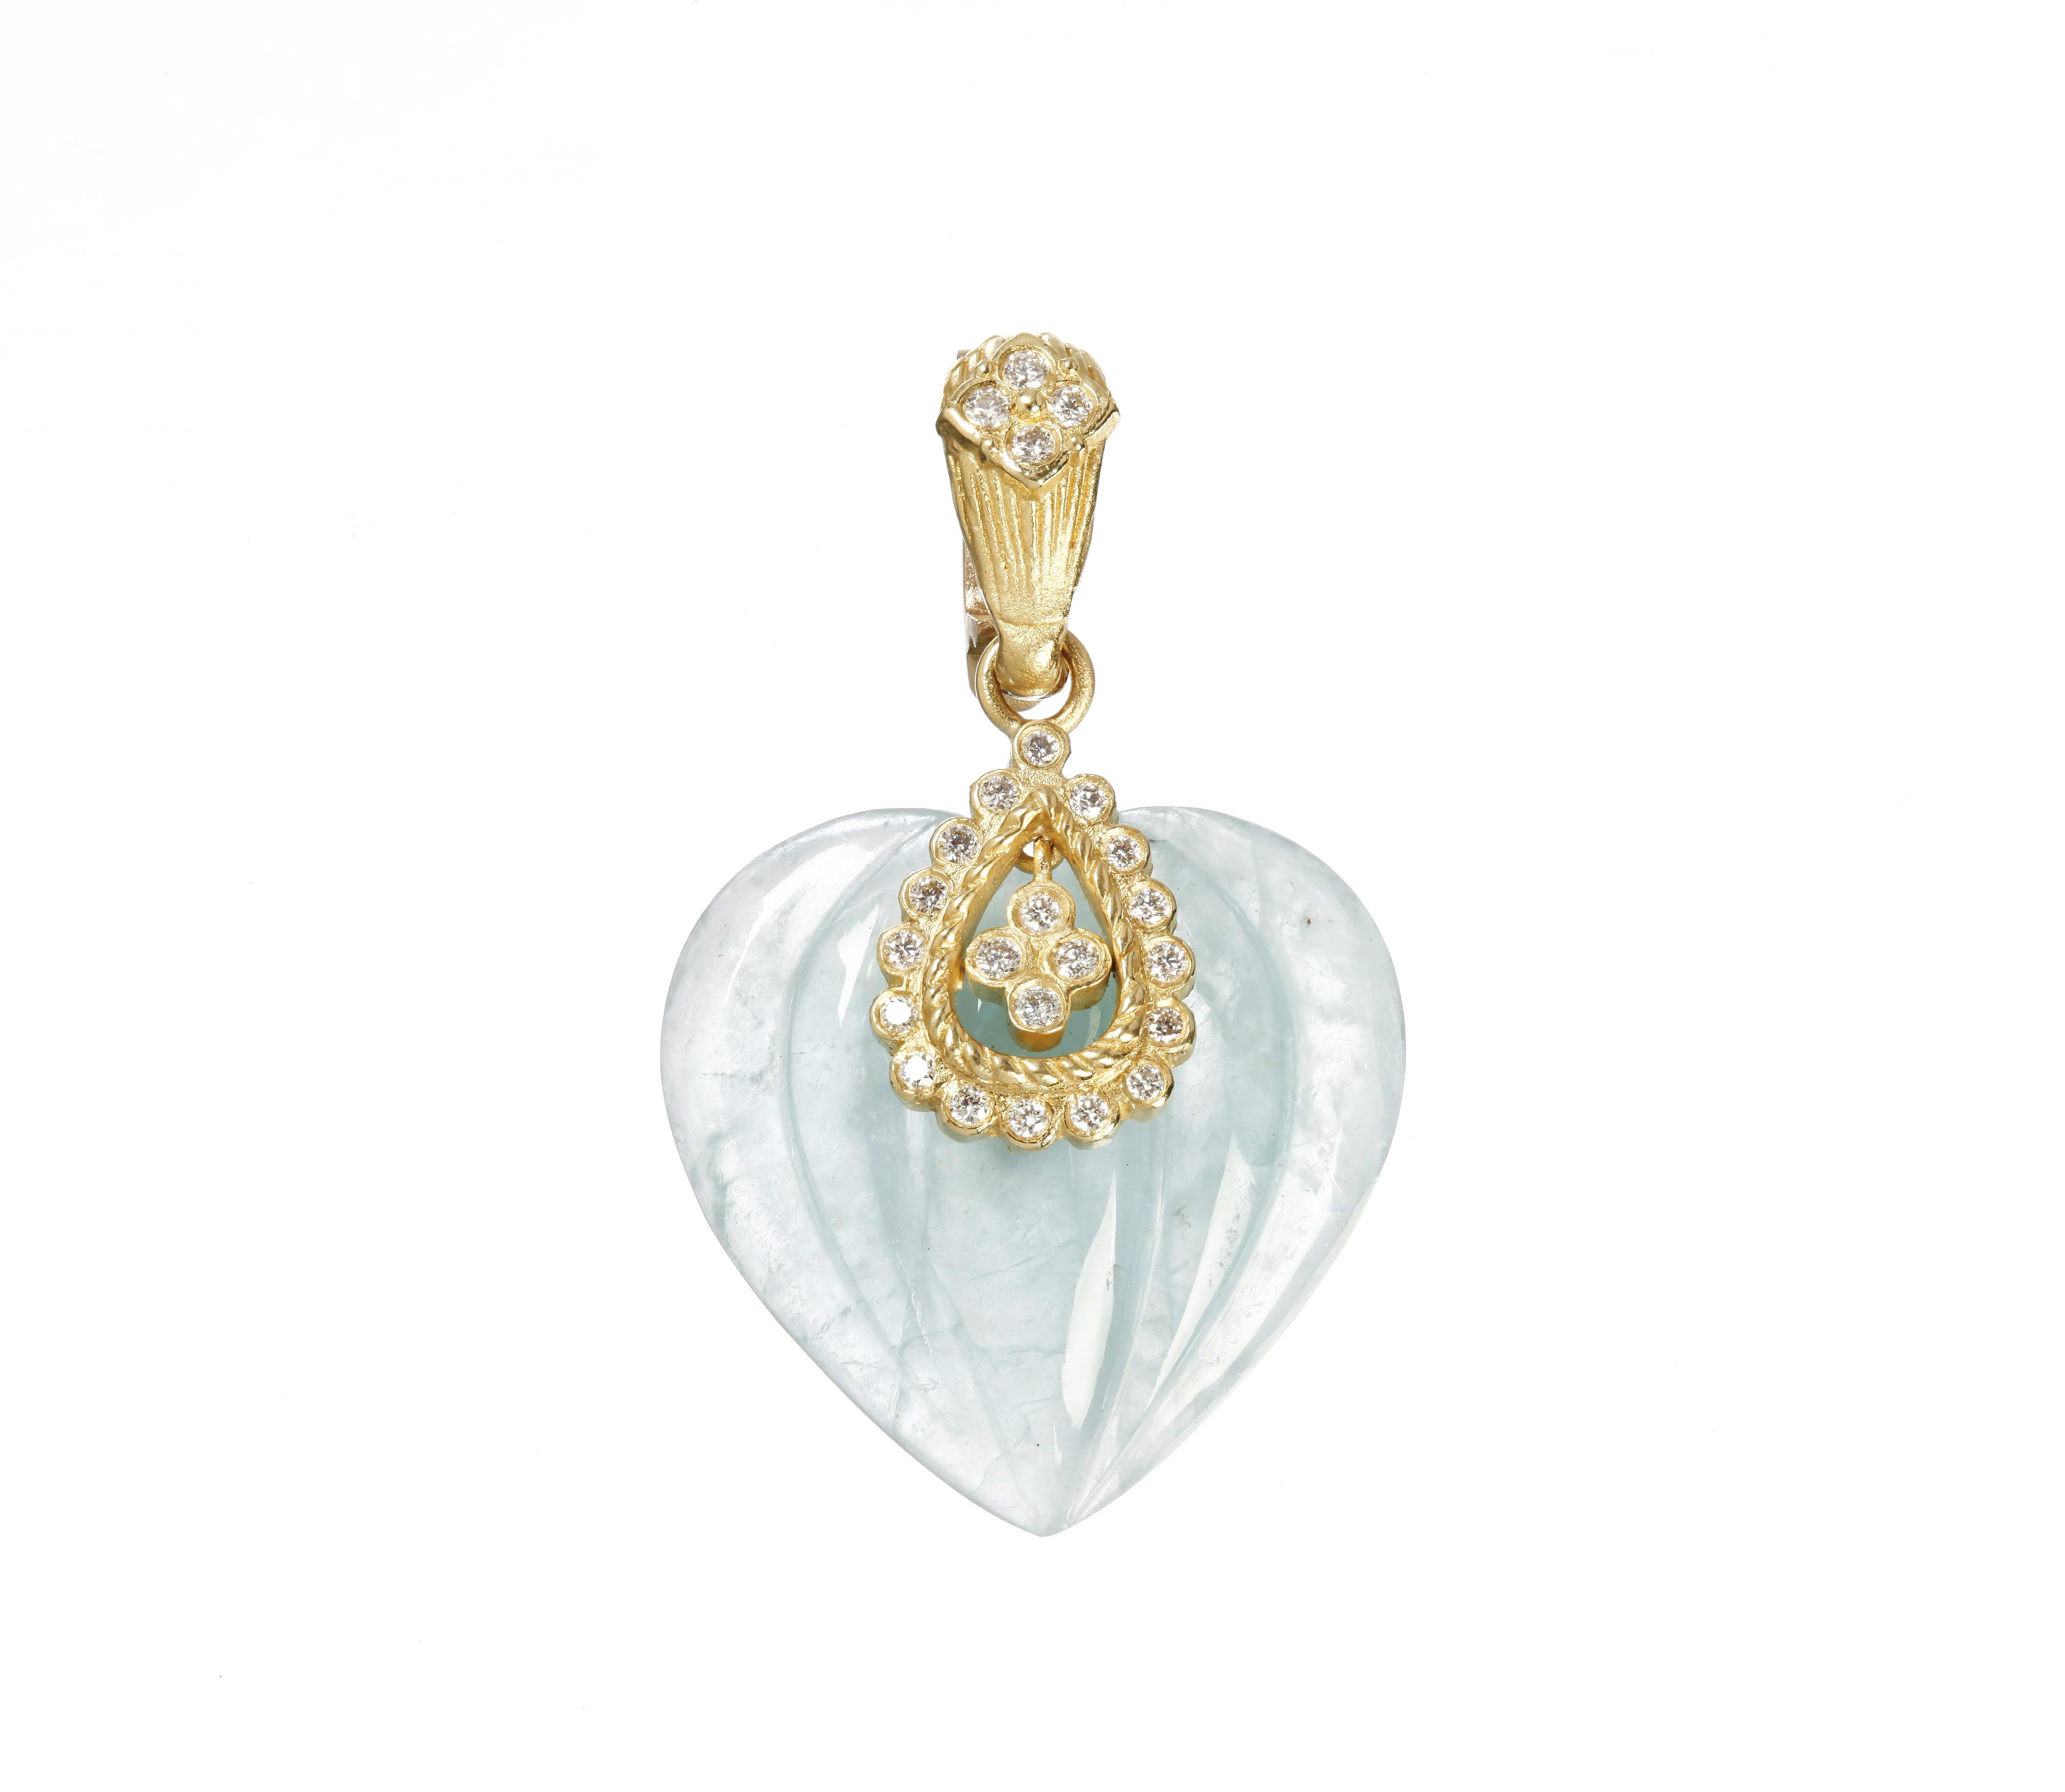 Stambolian Yellow Gold and Diamond Aquamarine Heart Pendant with Chain Necklace In New Condition For Sale In Boca Raton, FL